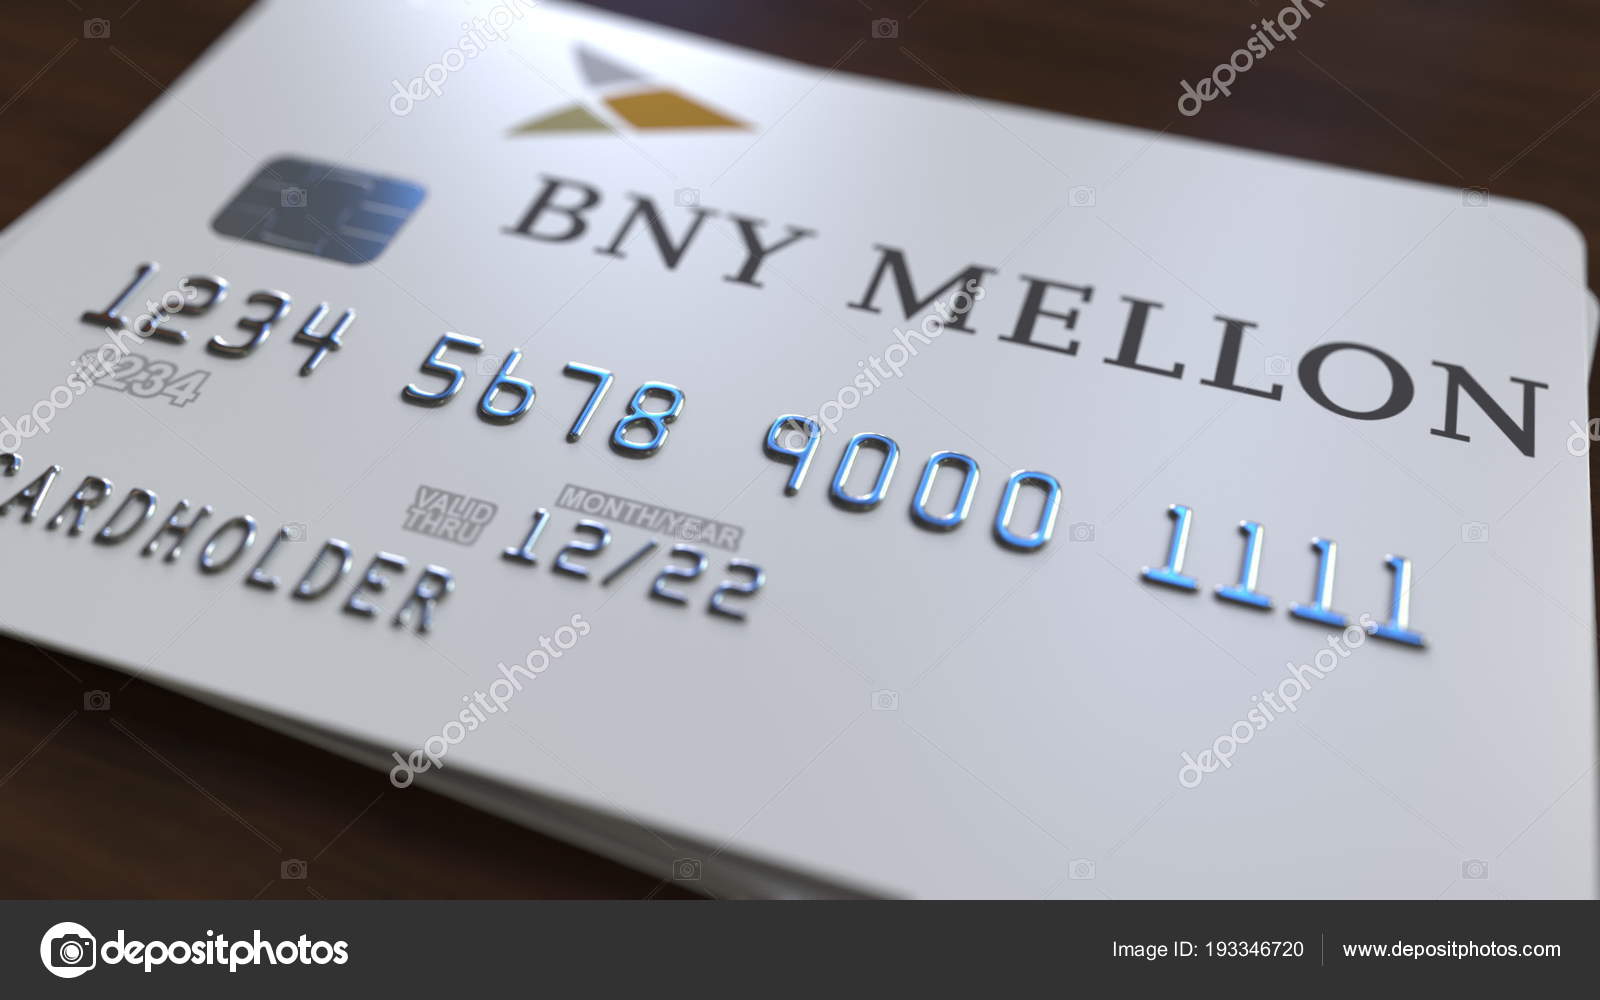 Plastic Card With Logo Of The Bank Of New York Mellon Bny